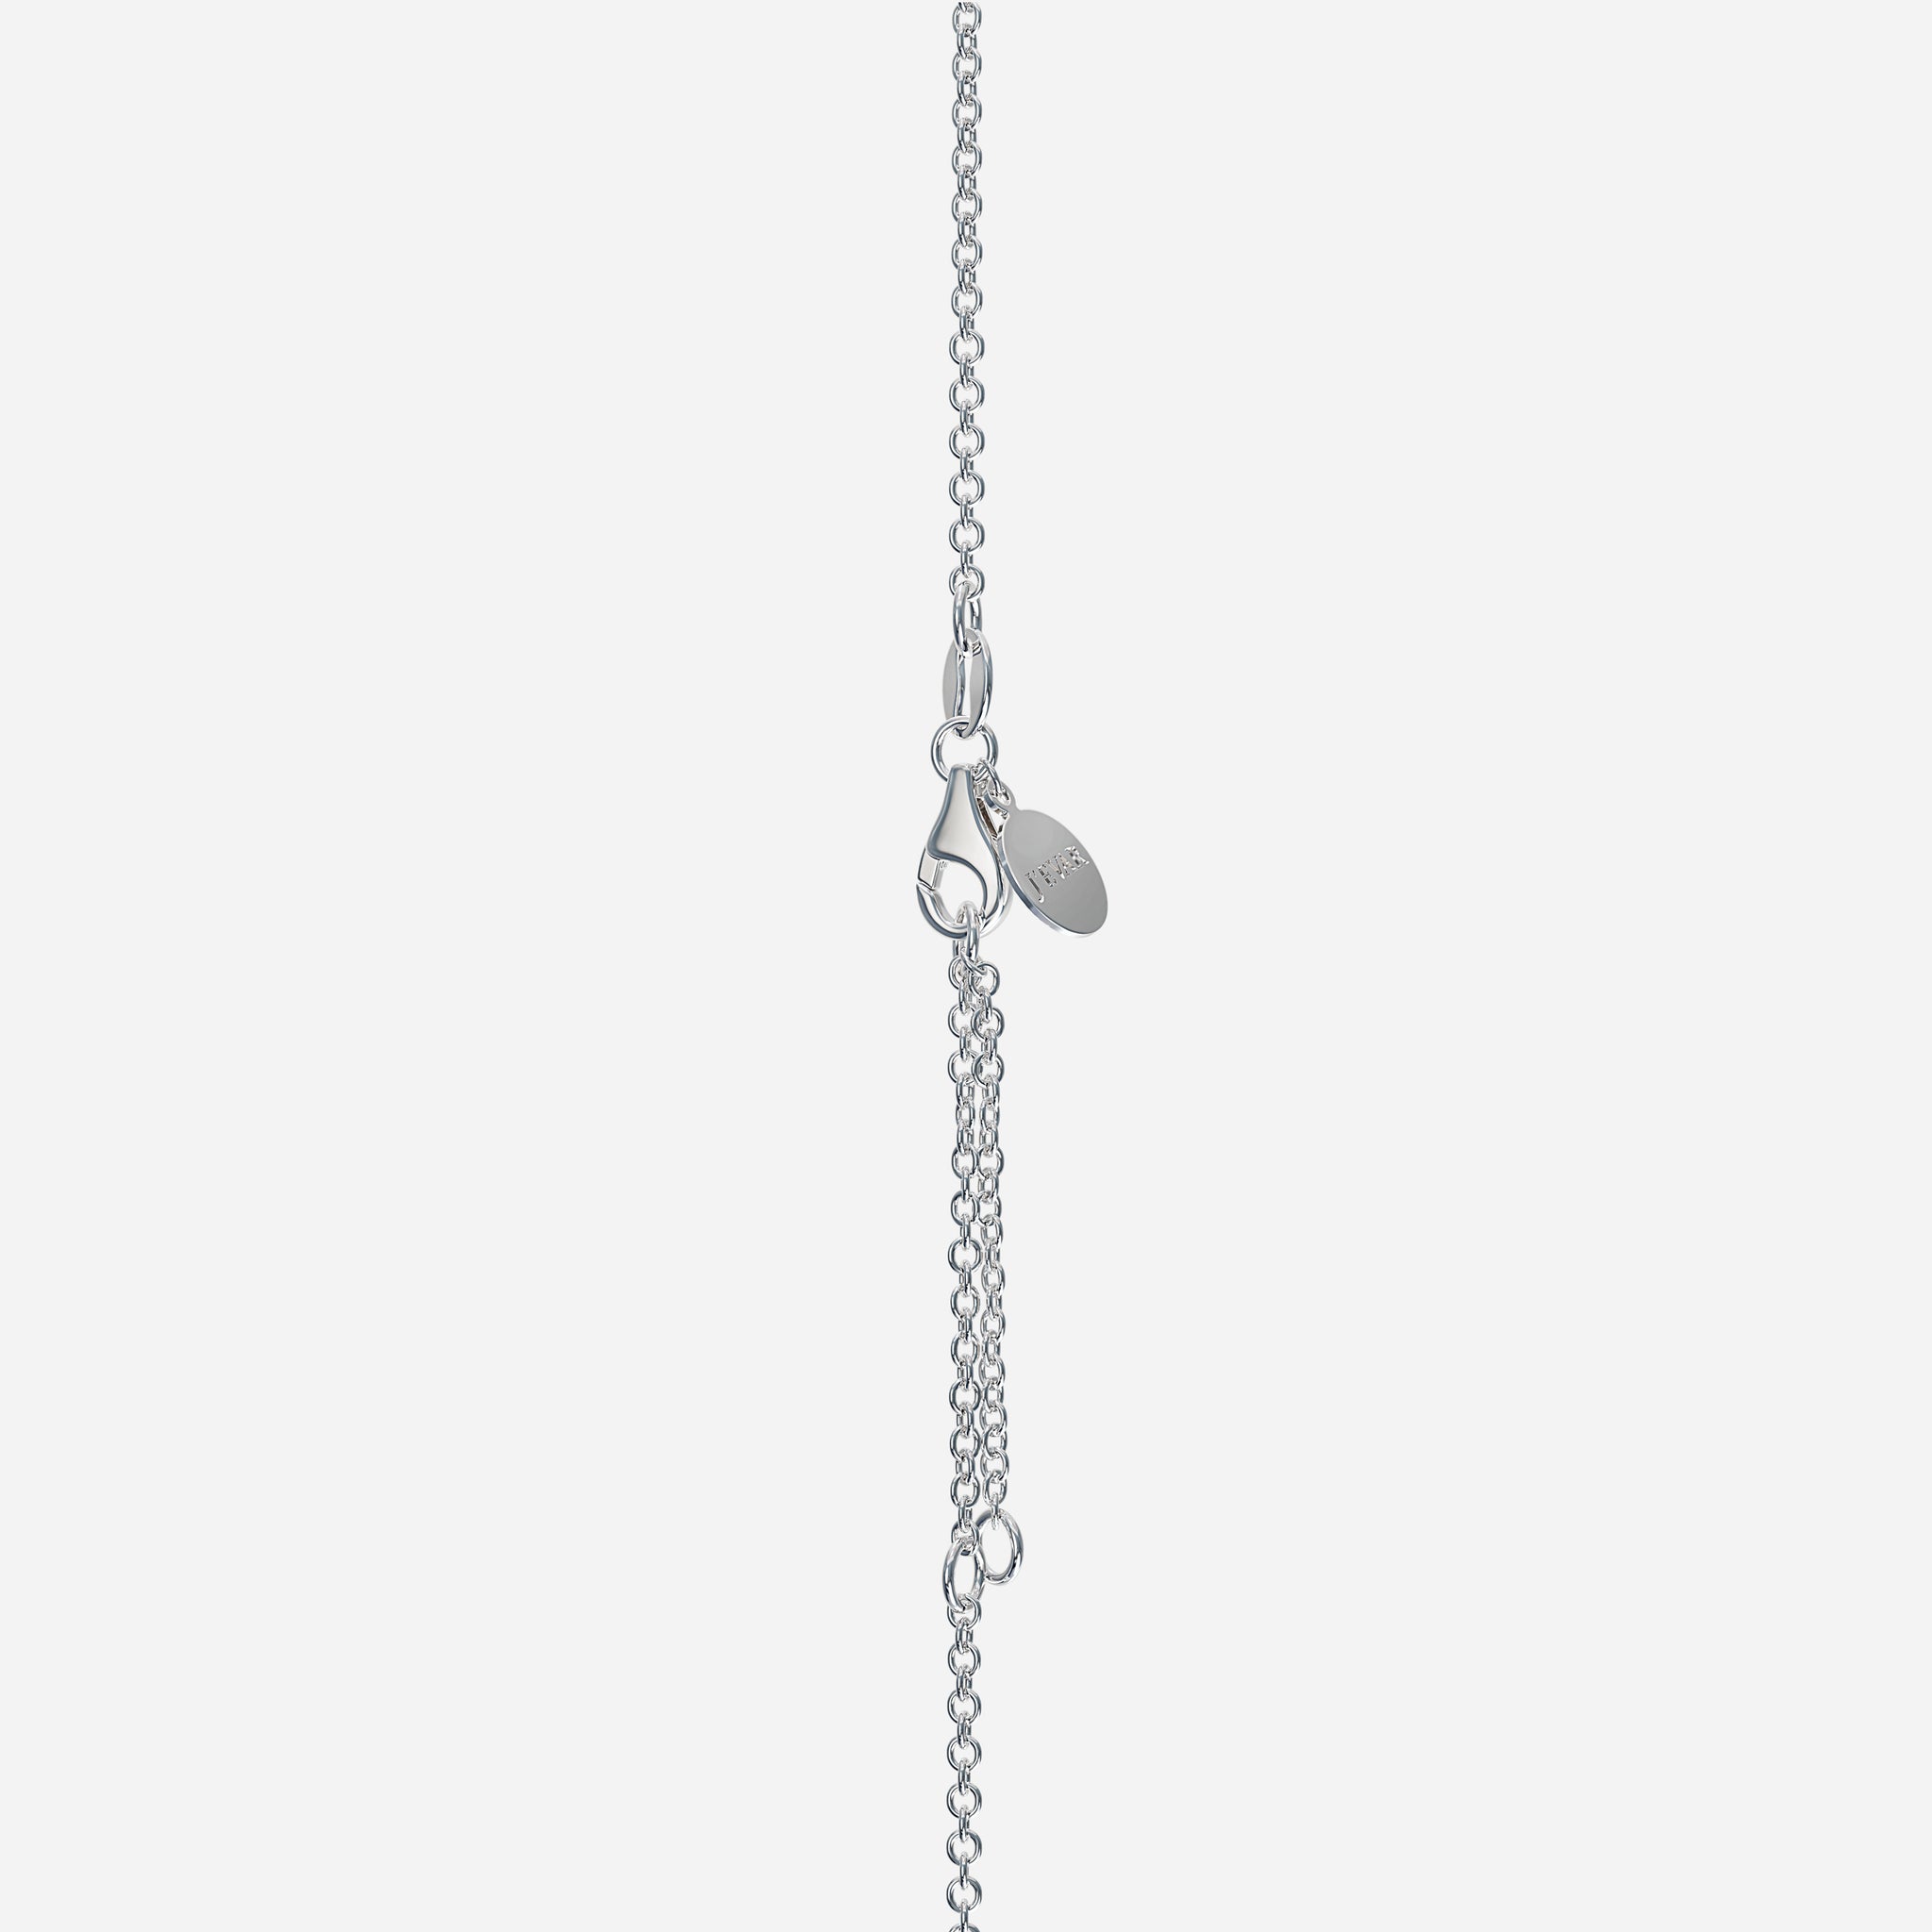 J'EVAR 14KT White Gold Double-Layered Lariat ALTR Lab Grown Diamond Necklace Lock View